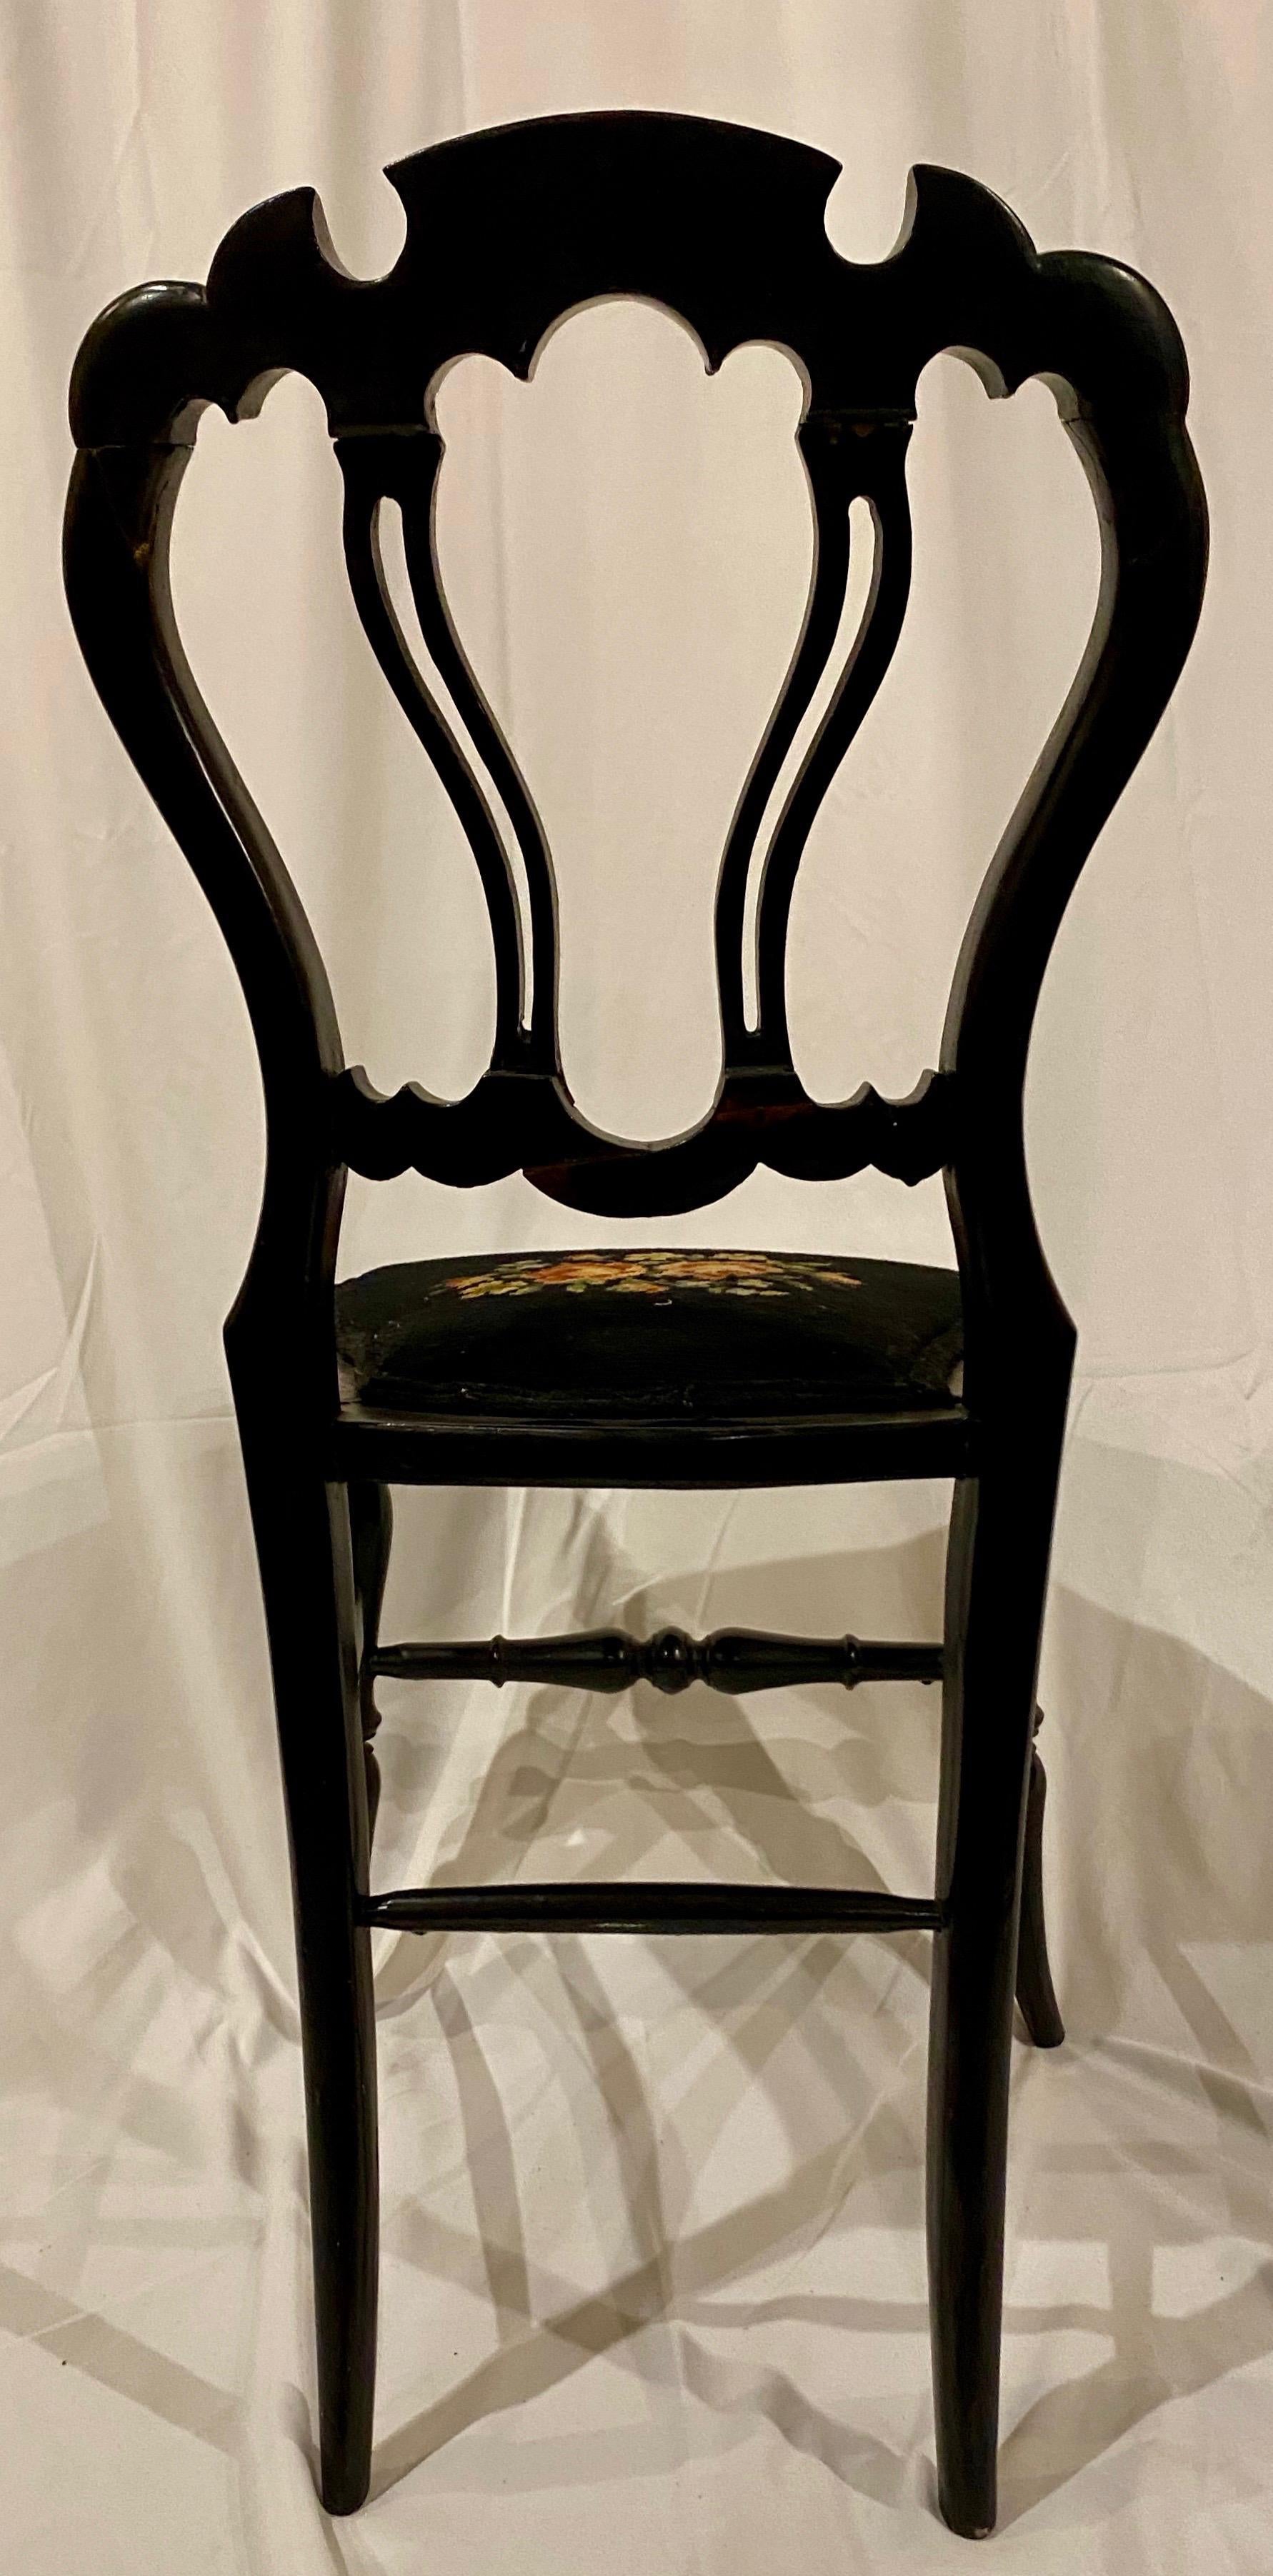 English Antique Mid-19th Century Lacquer Side Chairs with Mother of Pearl Inlay For Sale